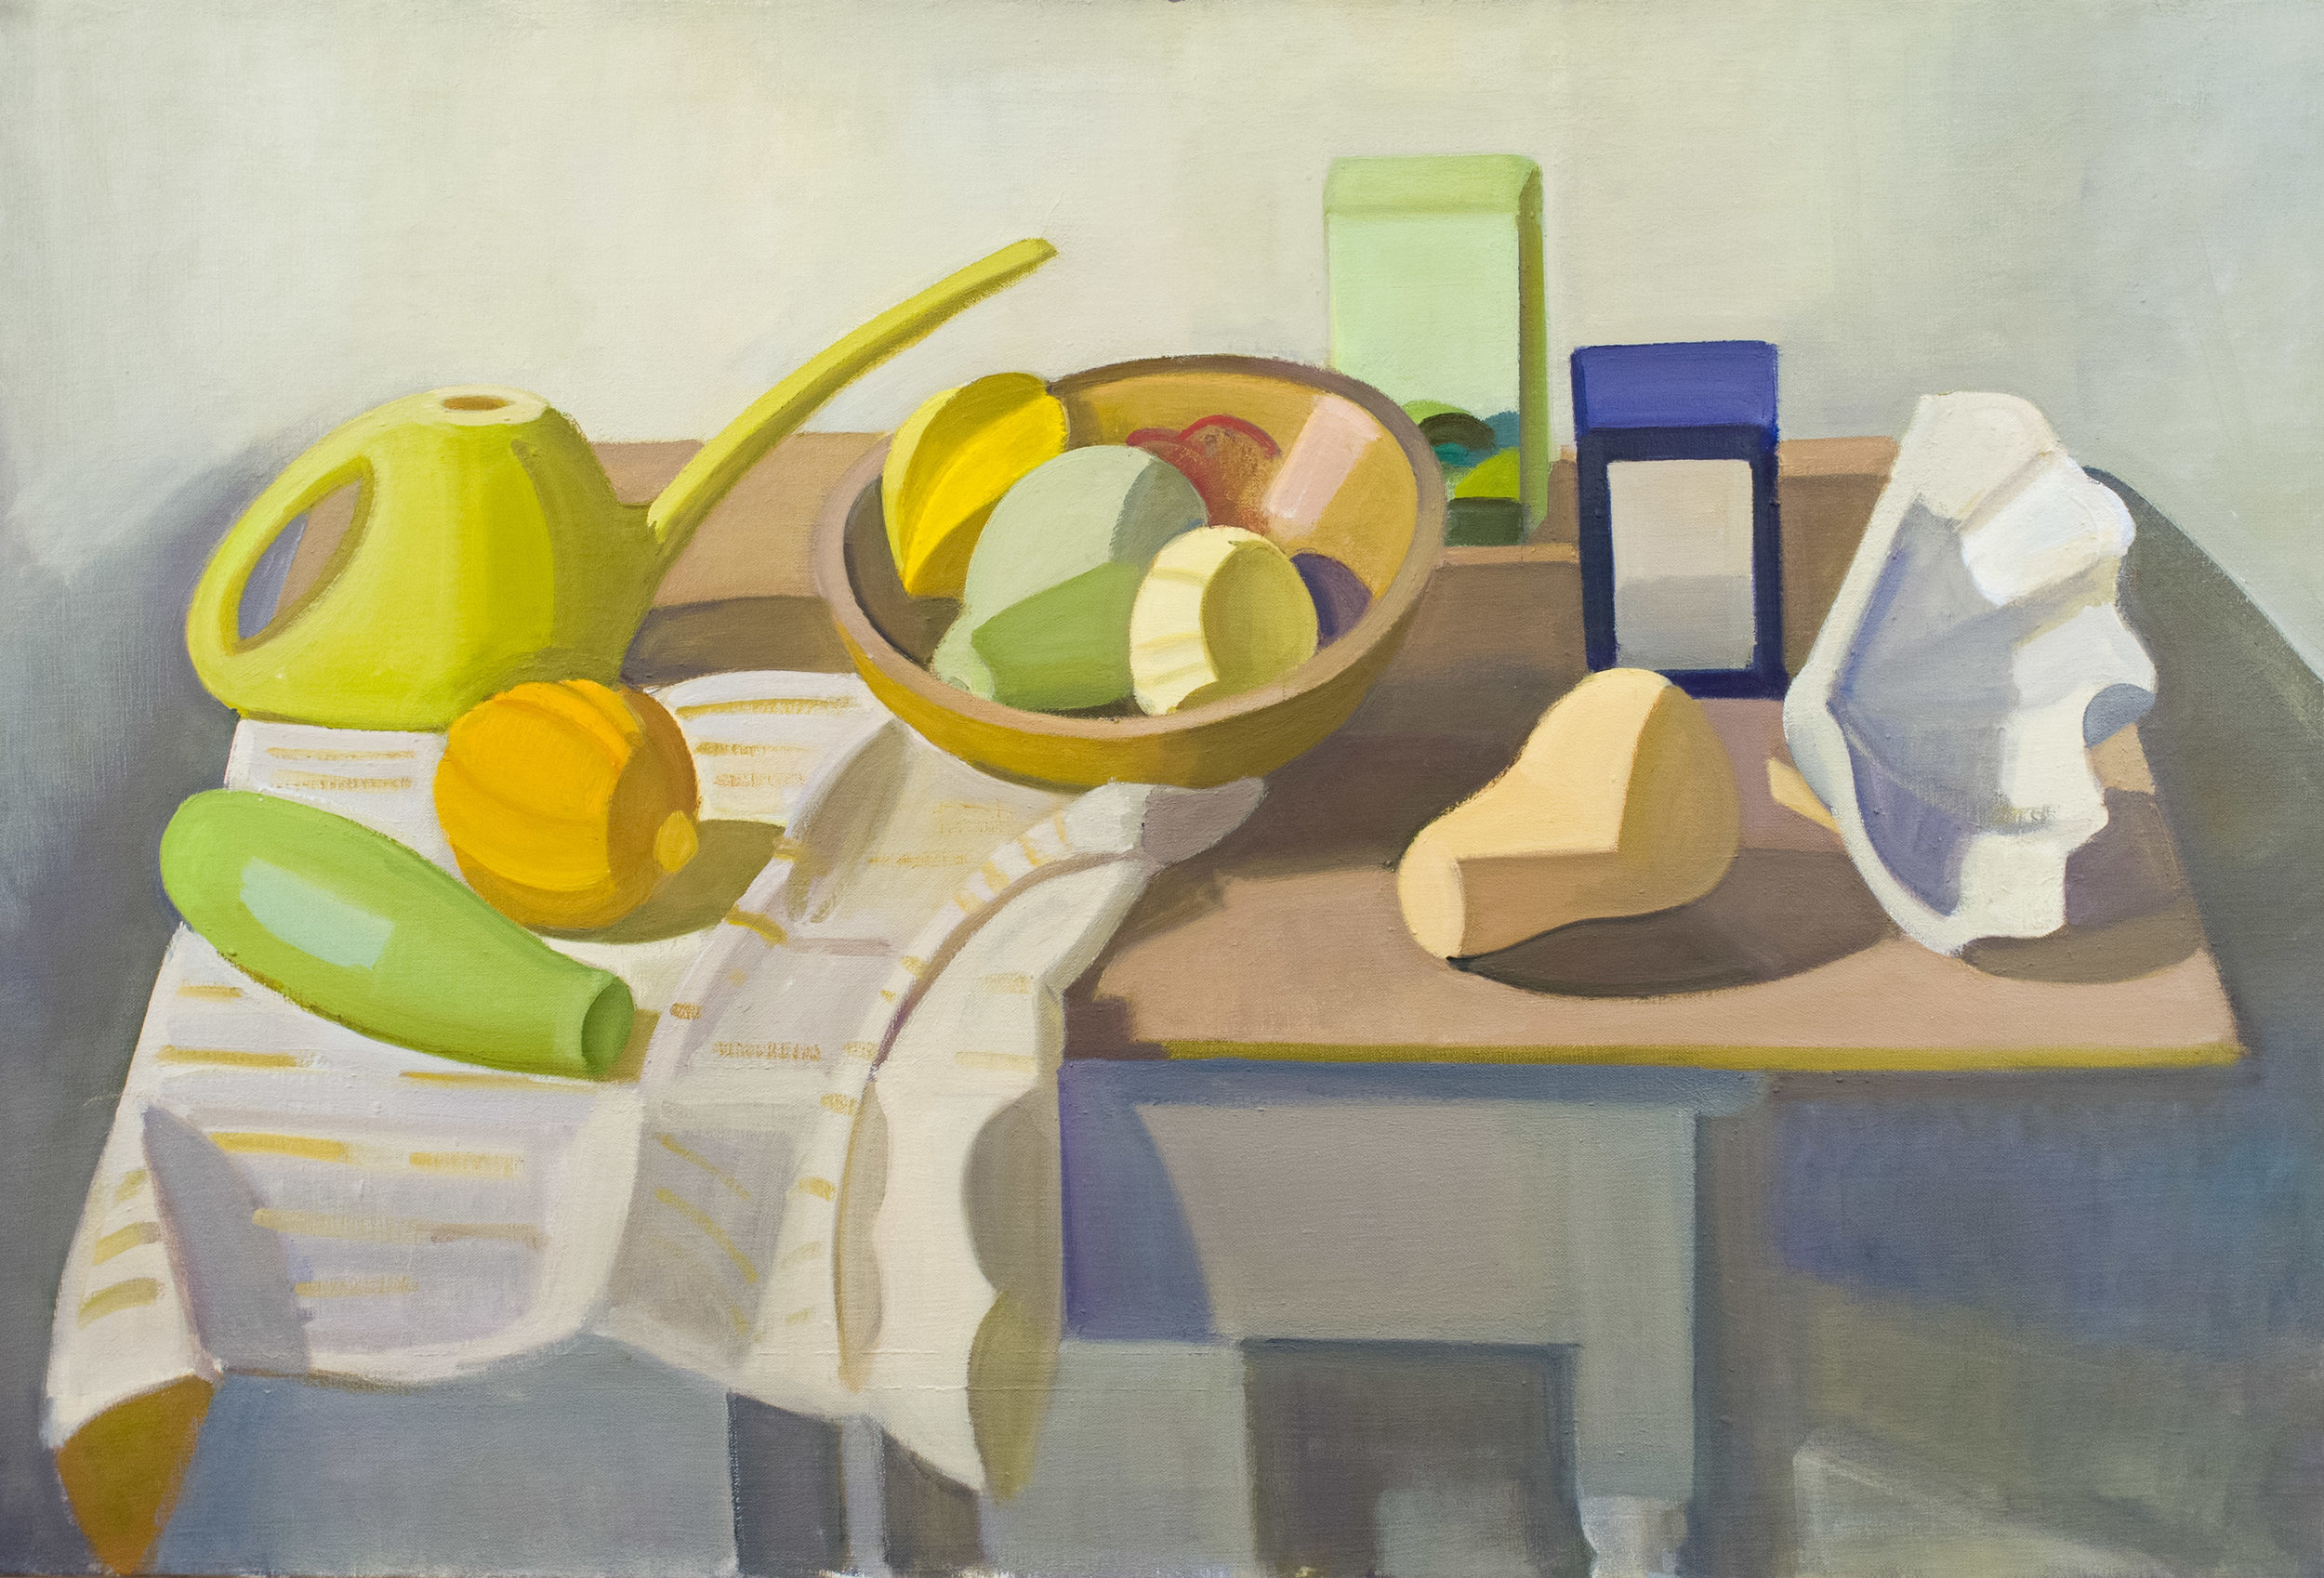   Watering Can and Tea Boxes with Squash and Shell , ca. 2006, oil on canvas, 25” x 37” (Private collection) 